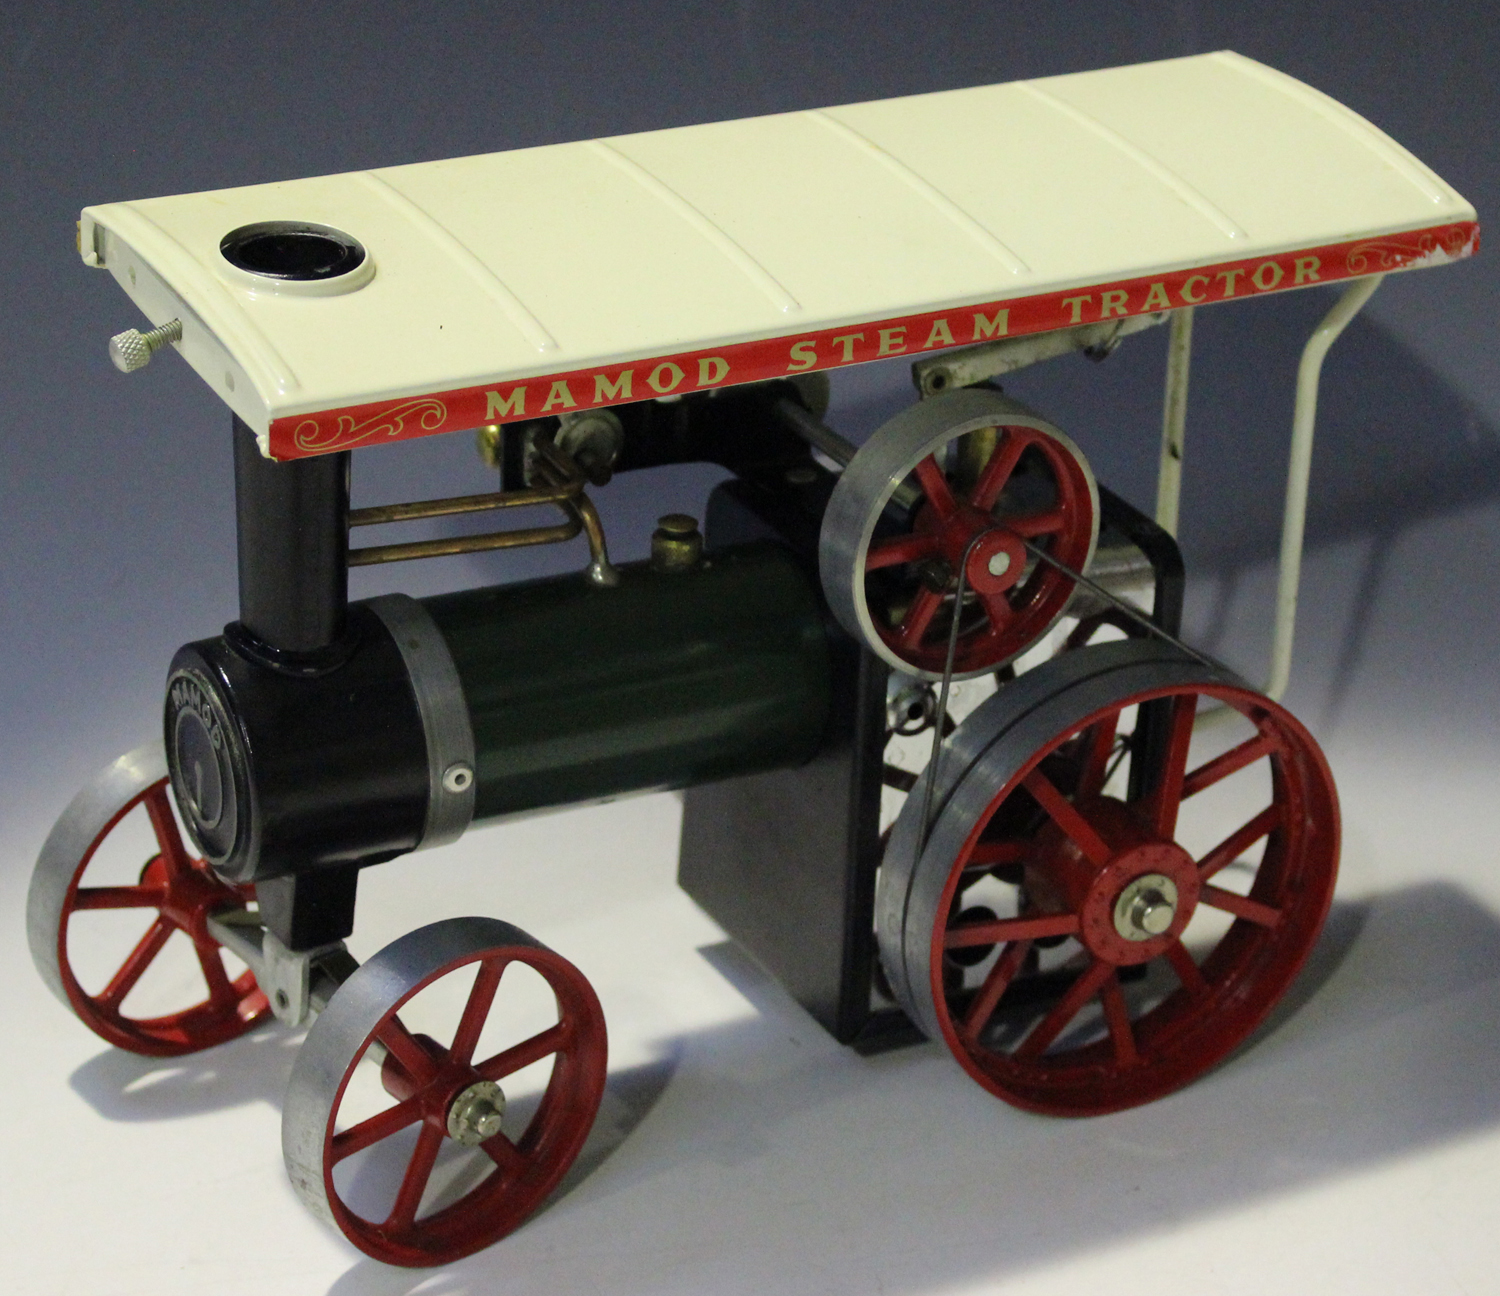 A Mamod steam tractor, boxed (some paint chips, box creased, torn and scuffed).Buyer’s Premium 29.4%